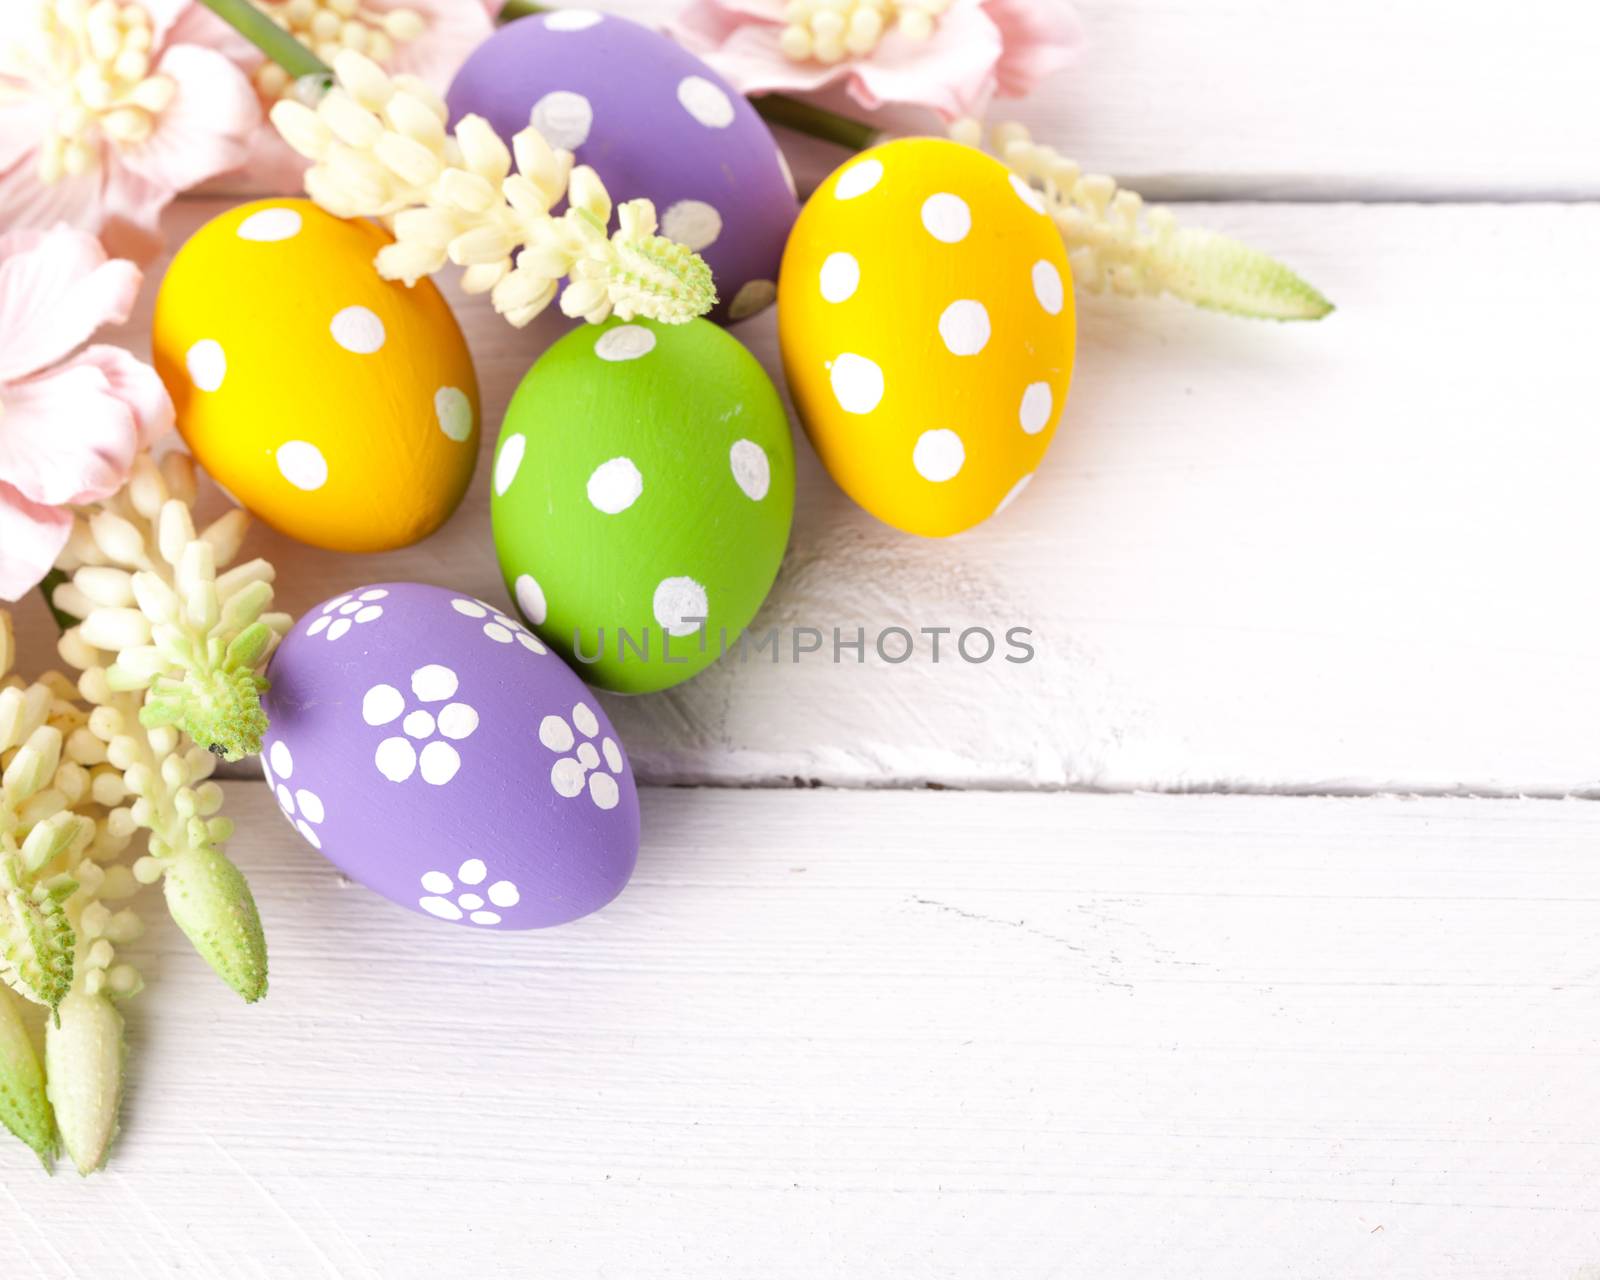 Colorful Easter Eggs on White or Gray Rustic Wood Background